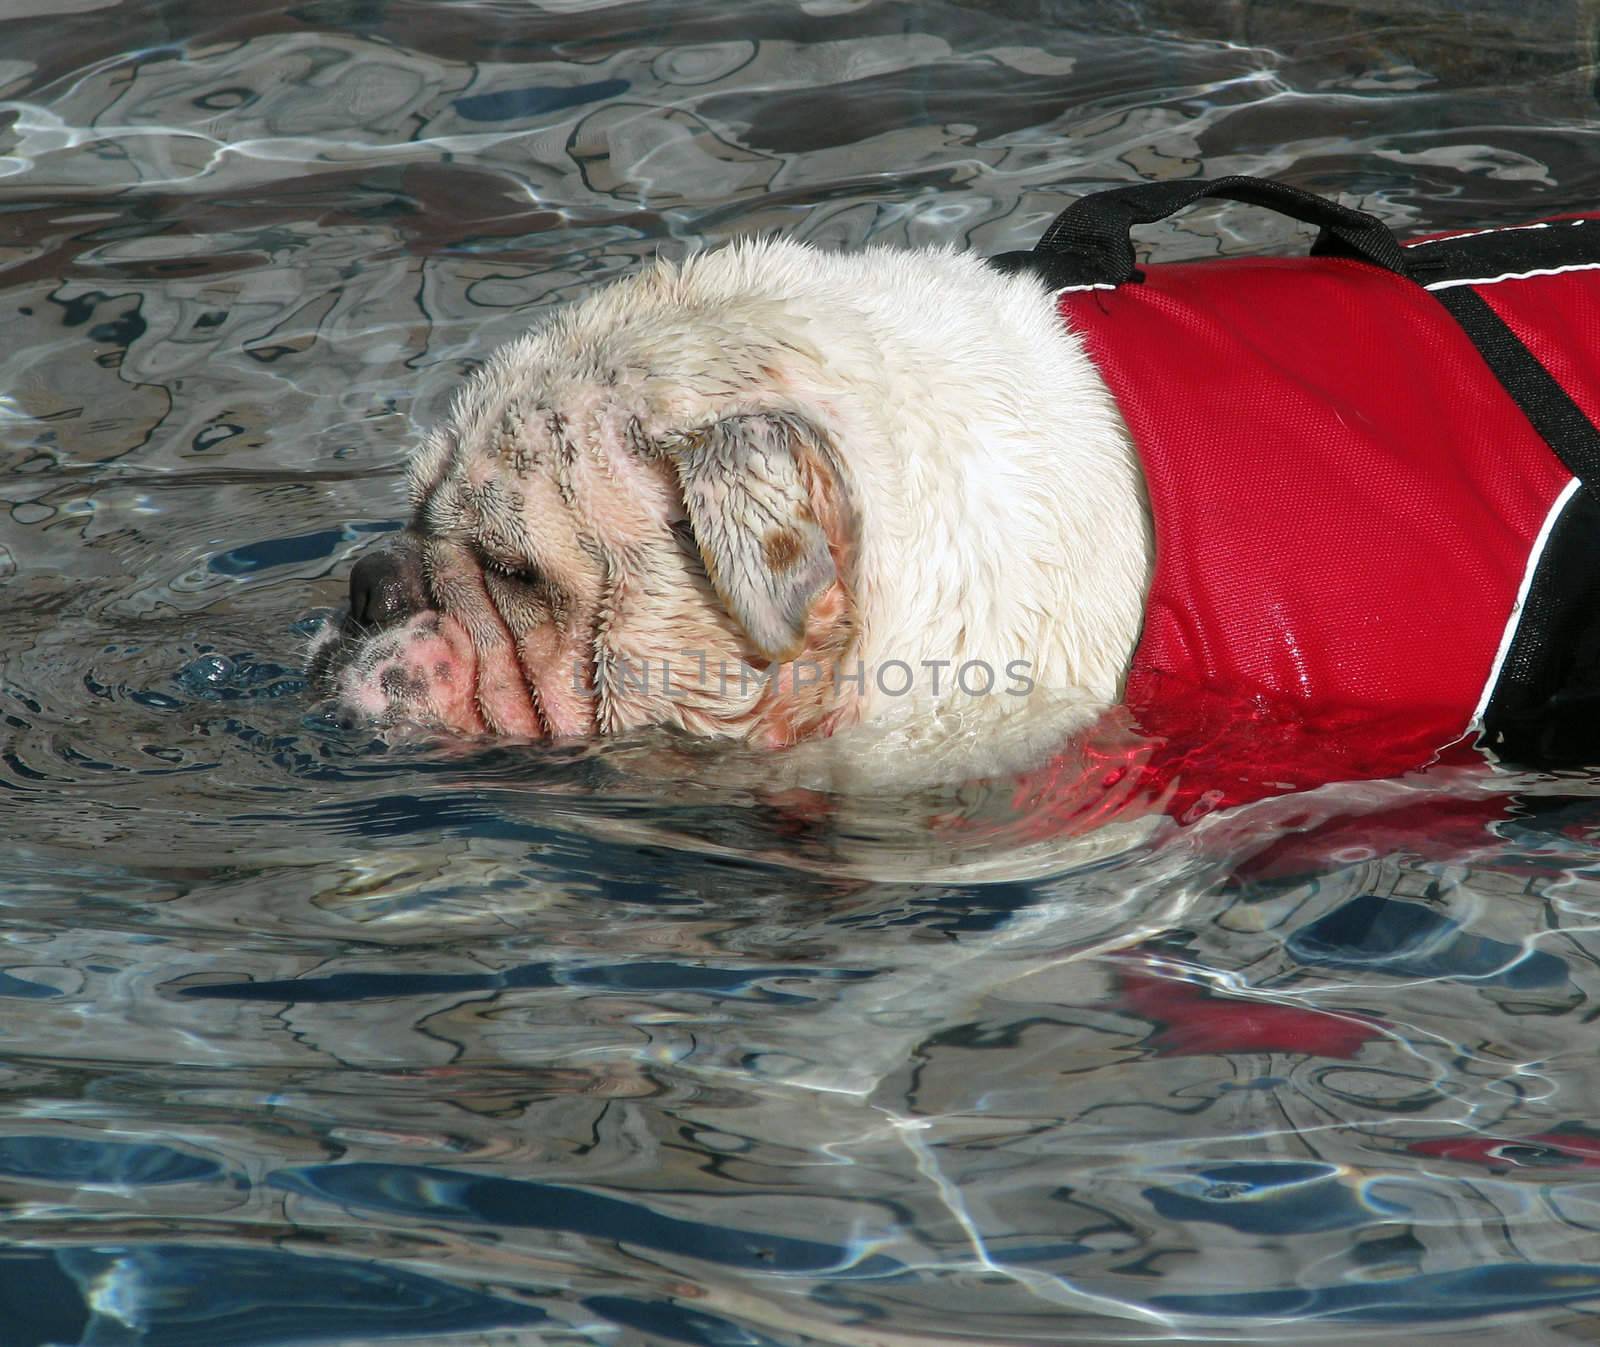 English Bulldog Swimming with Lifevest by bellafotosolo